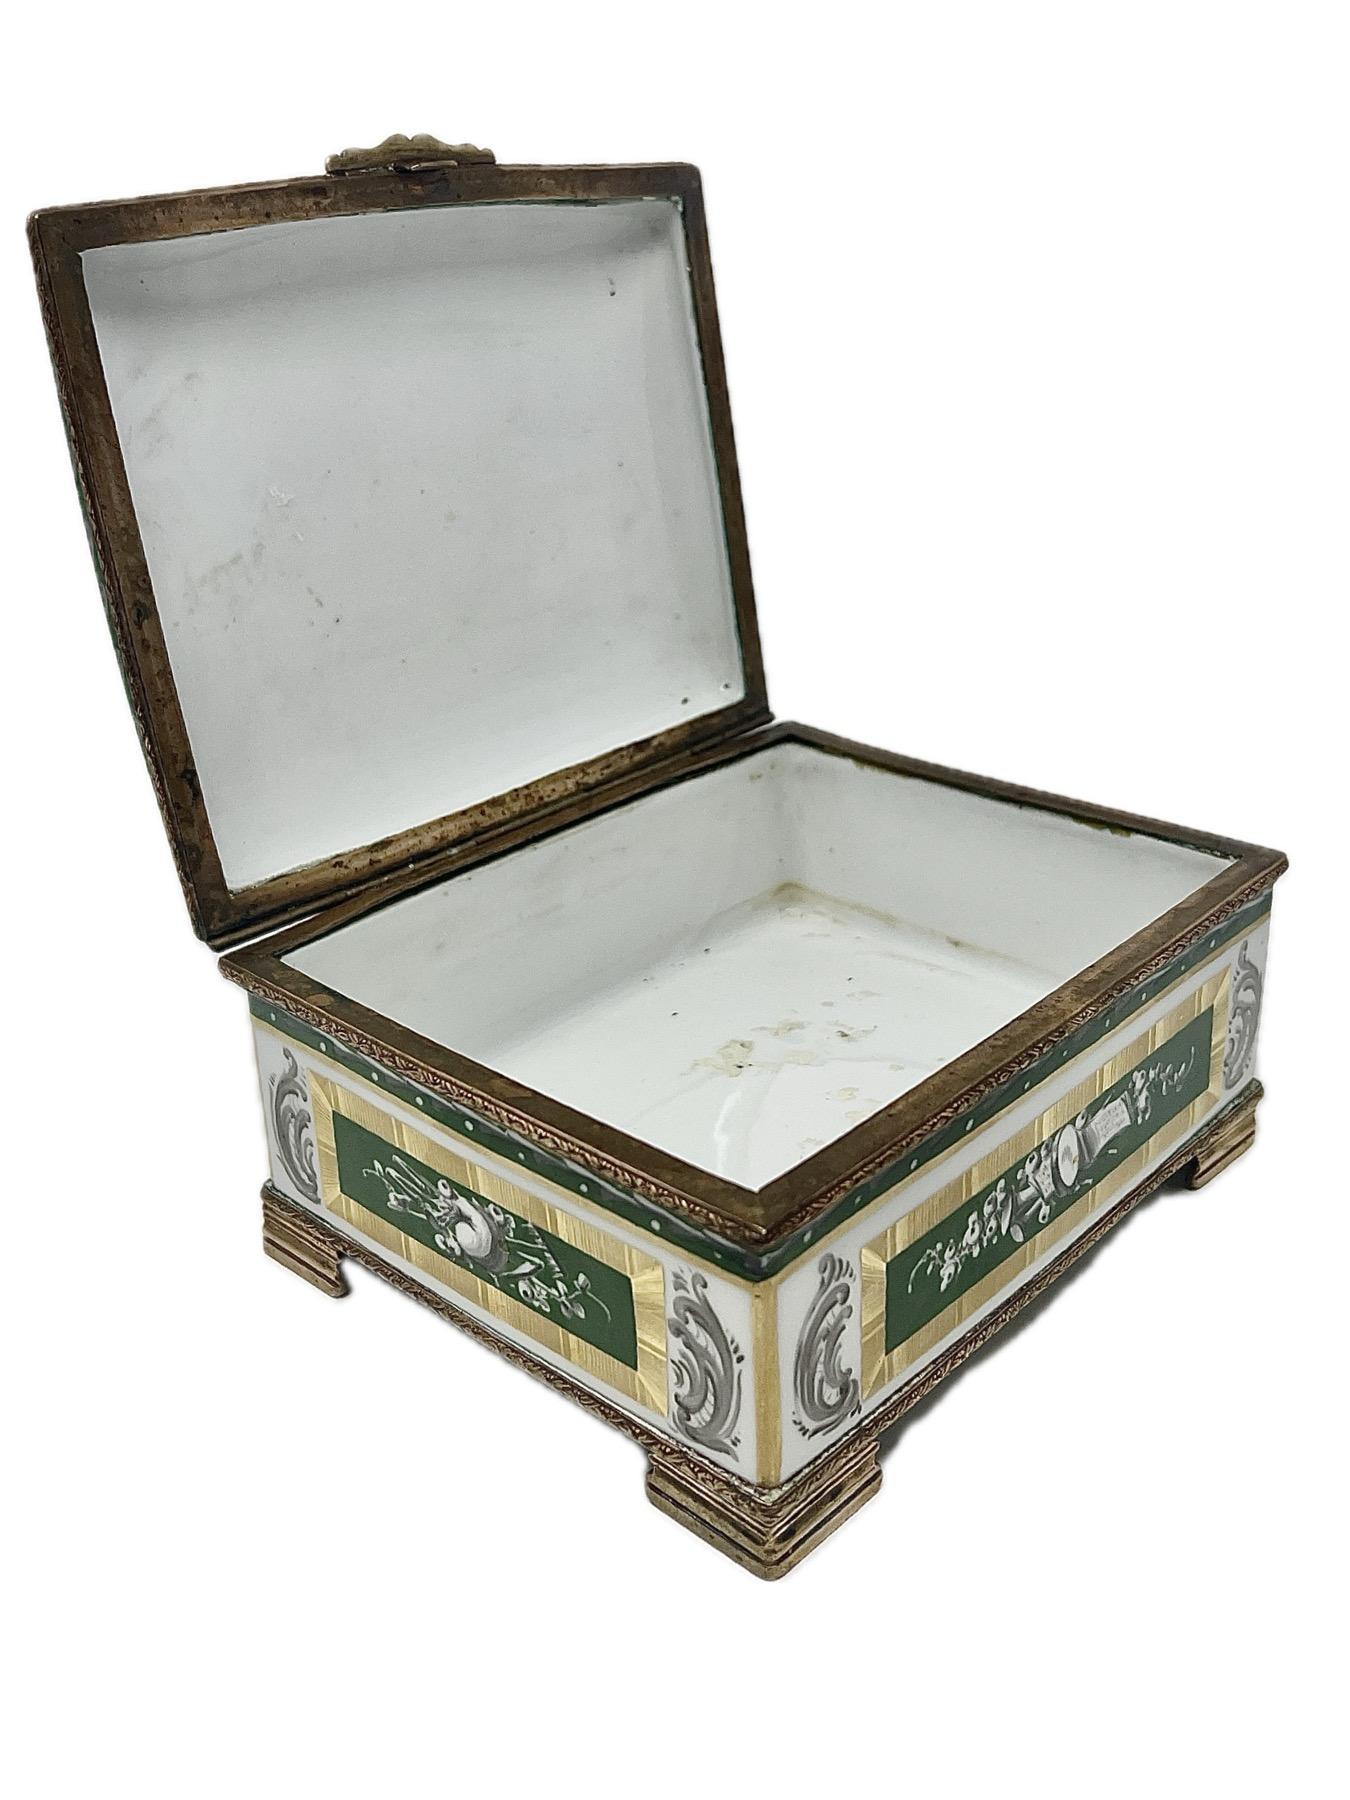 20th Century Antique French Gold Bronze Mounted Green & White Porcelain Jewel Box, Circa 1900 For Sale